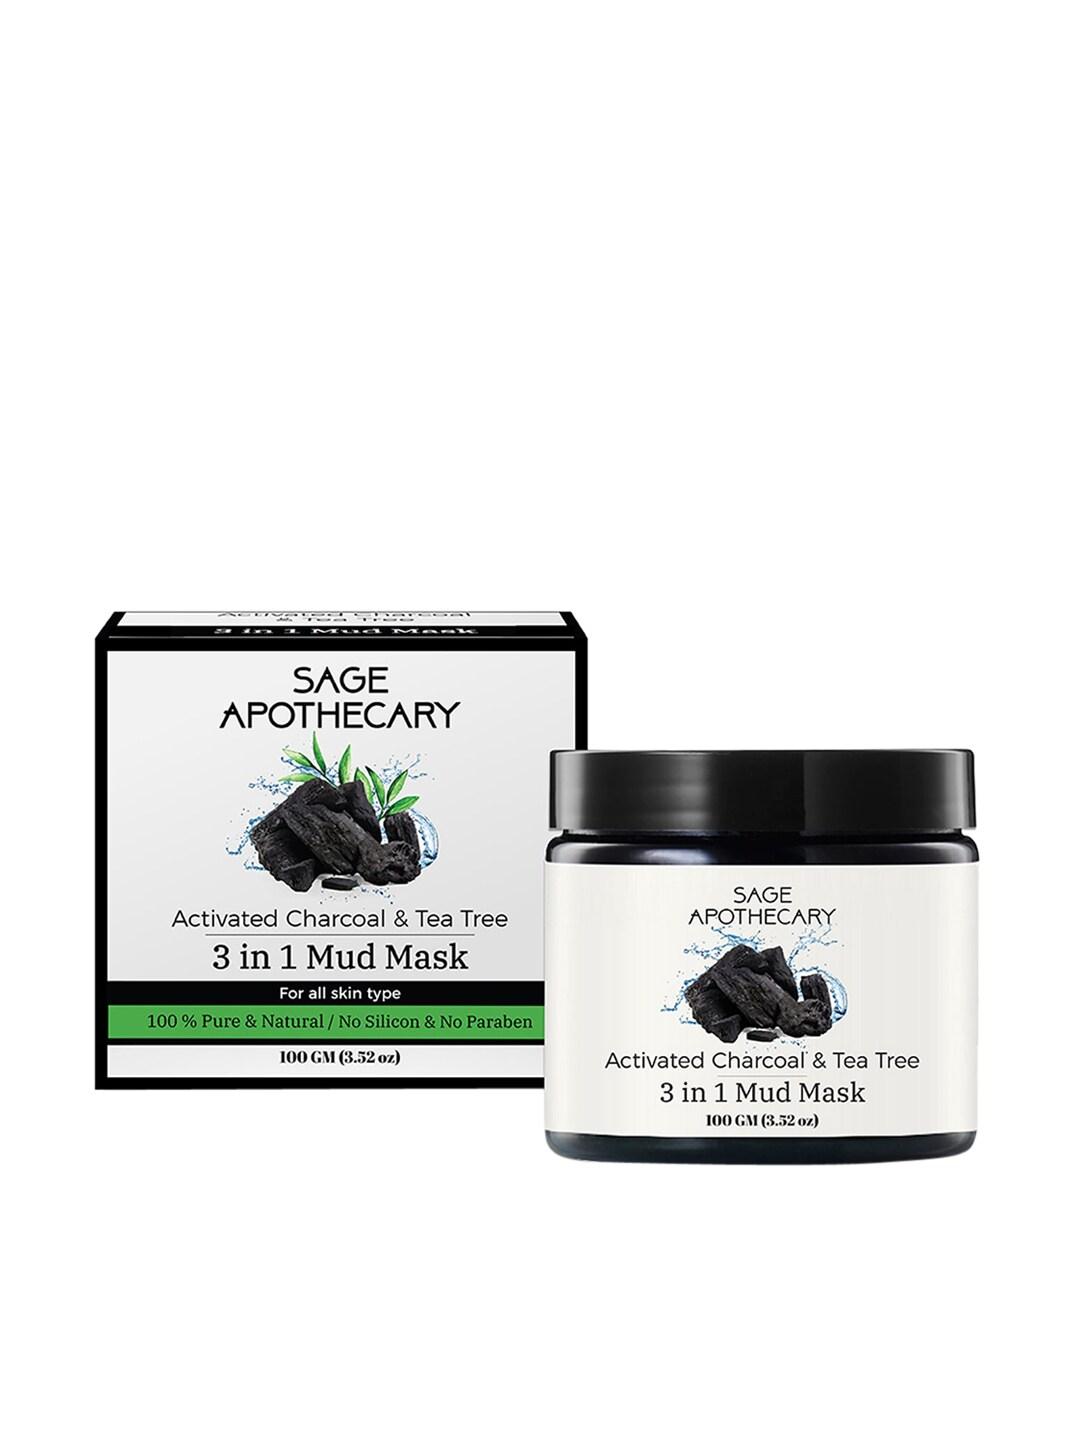 SAGE APOTHECARY Black Activated Charcoal & Tea Tree 3 in 1 Mud Mask, 100g